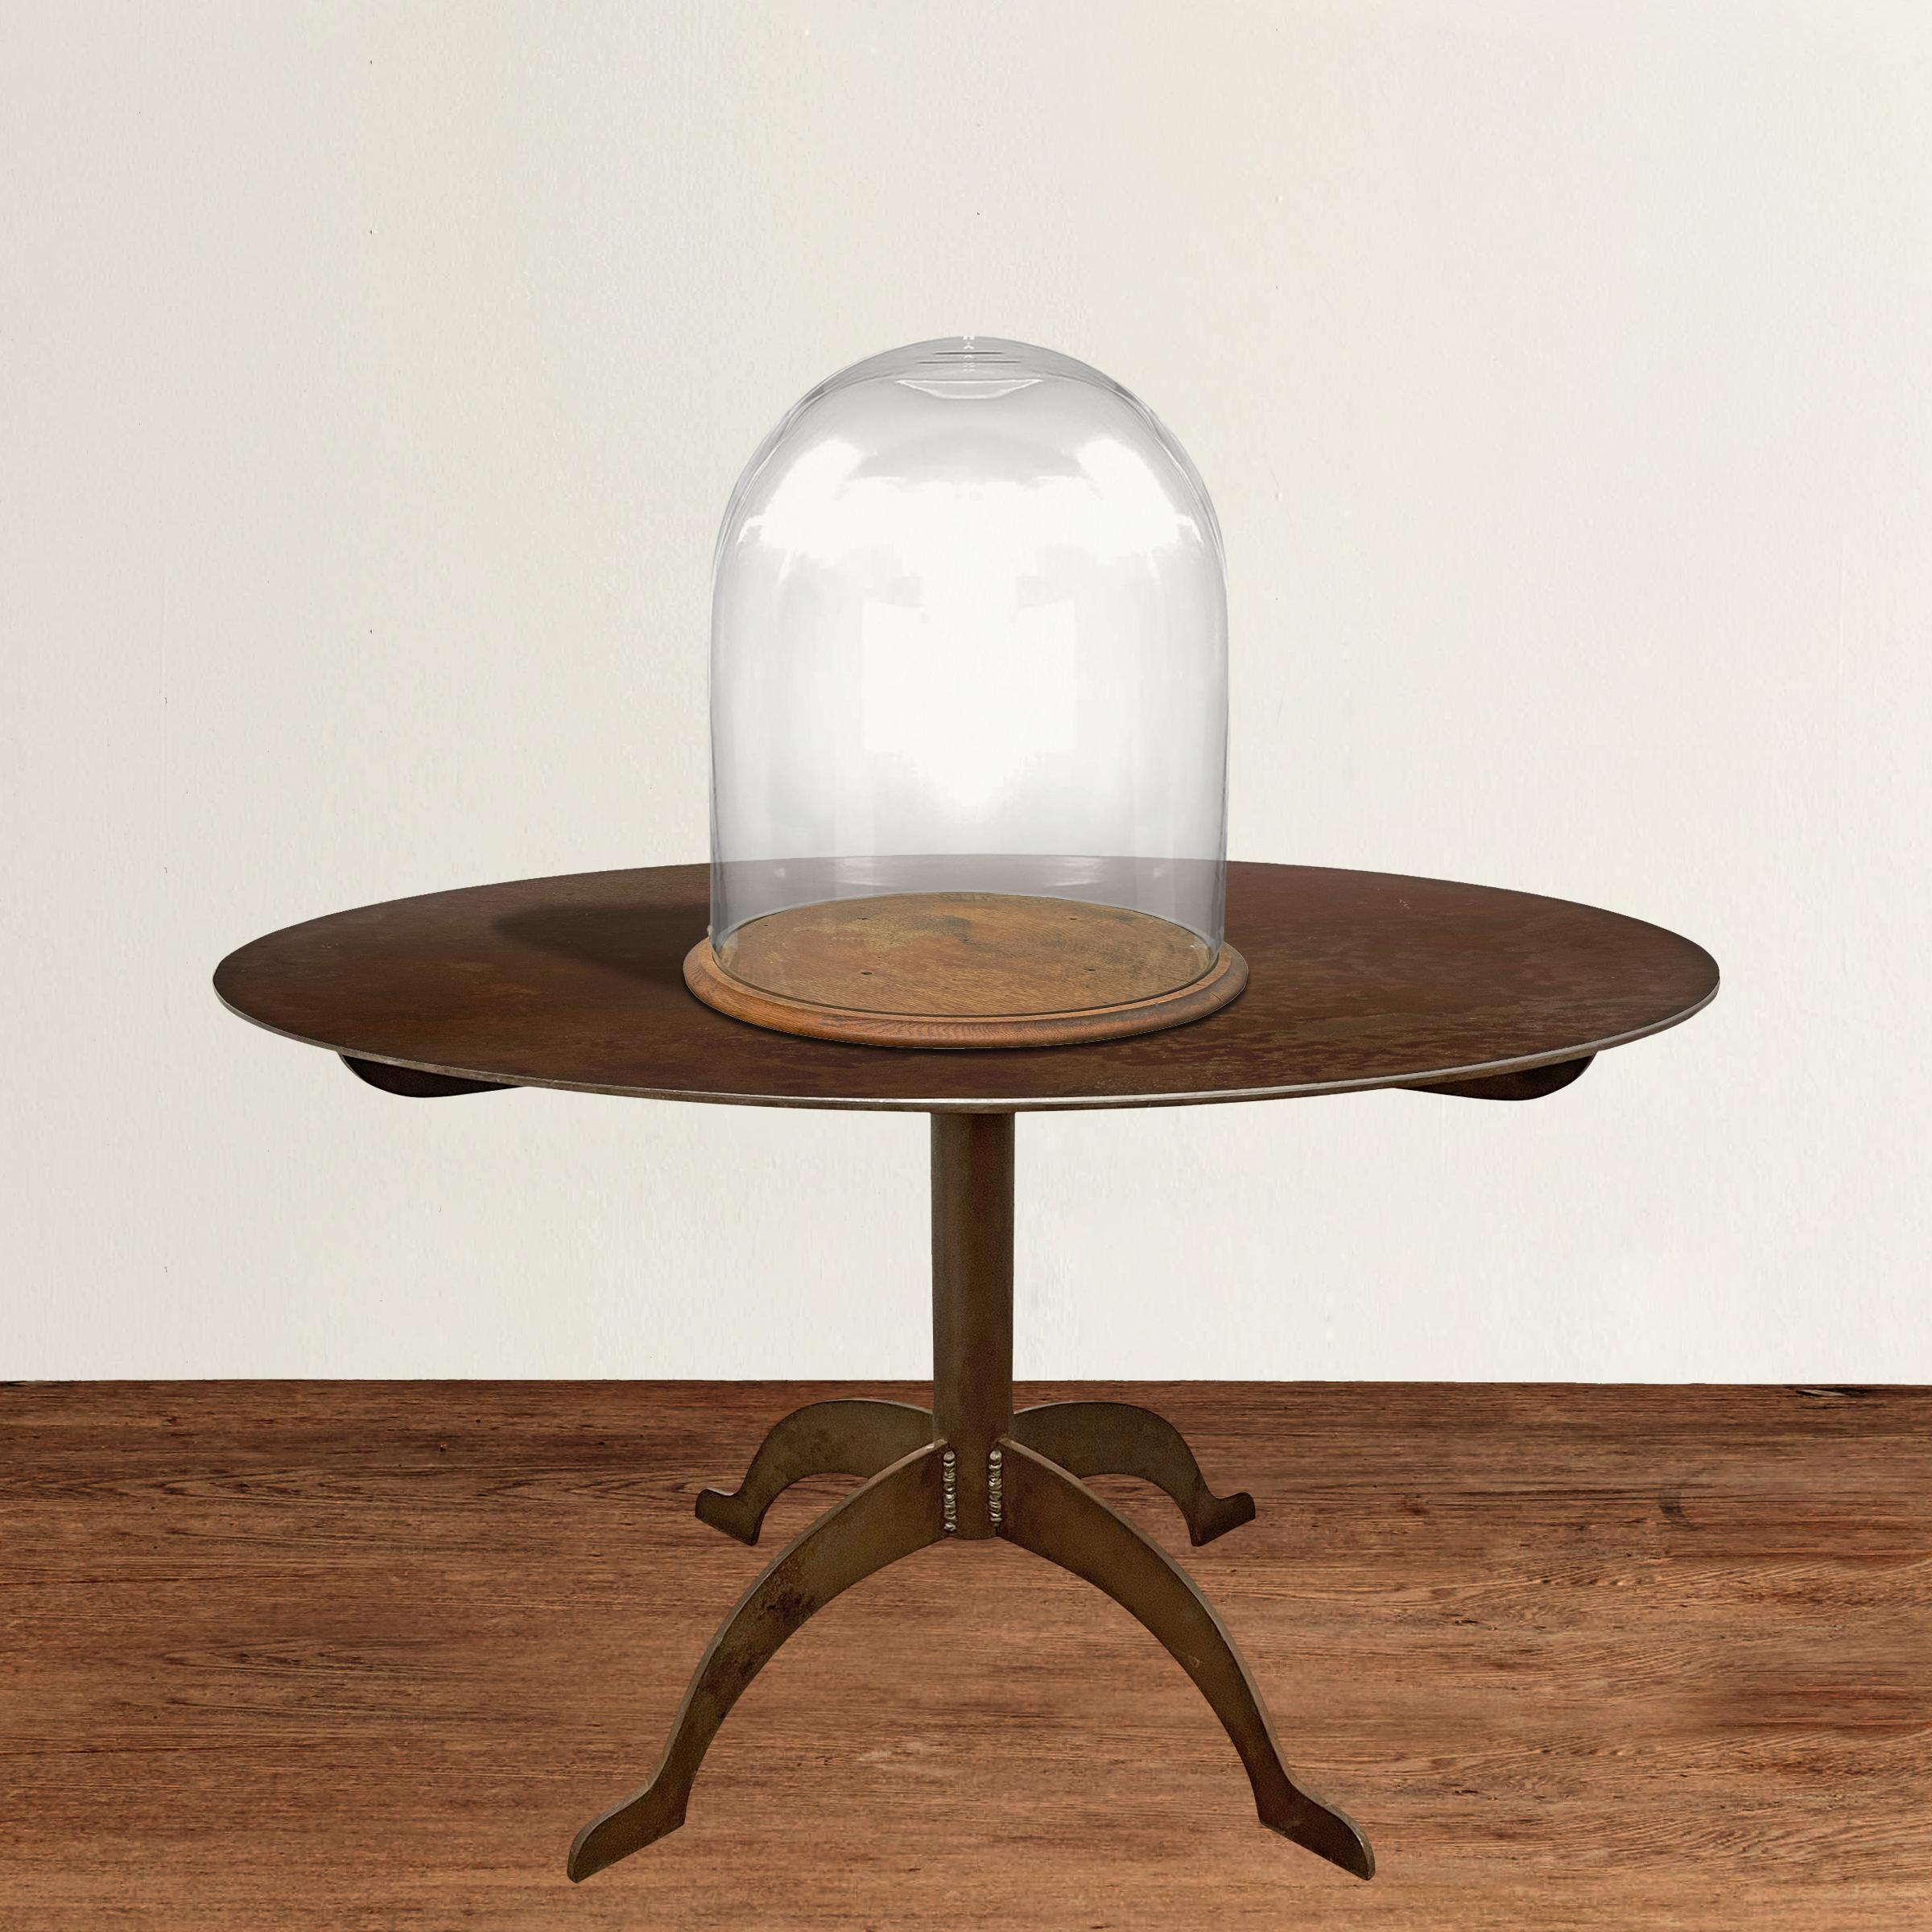 An incredible and monumental 19th century American glass cloche with a wooden platform raised on bun feet, and just waiting for you turn it into your very own cabinets of curiosities.